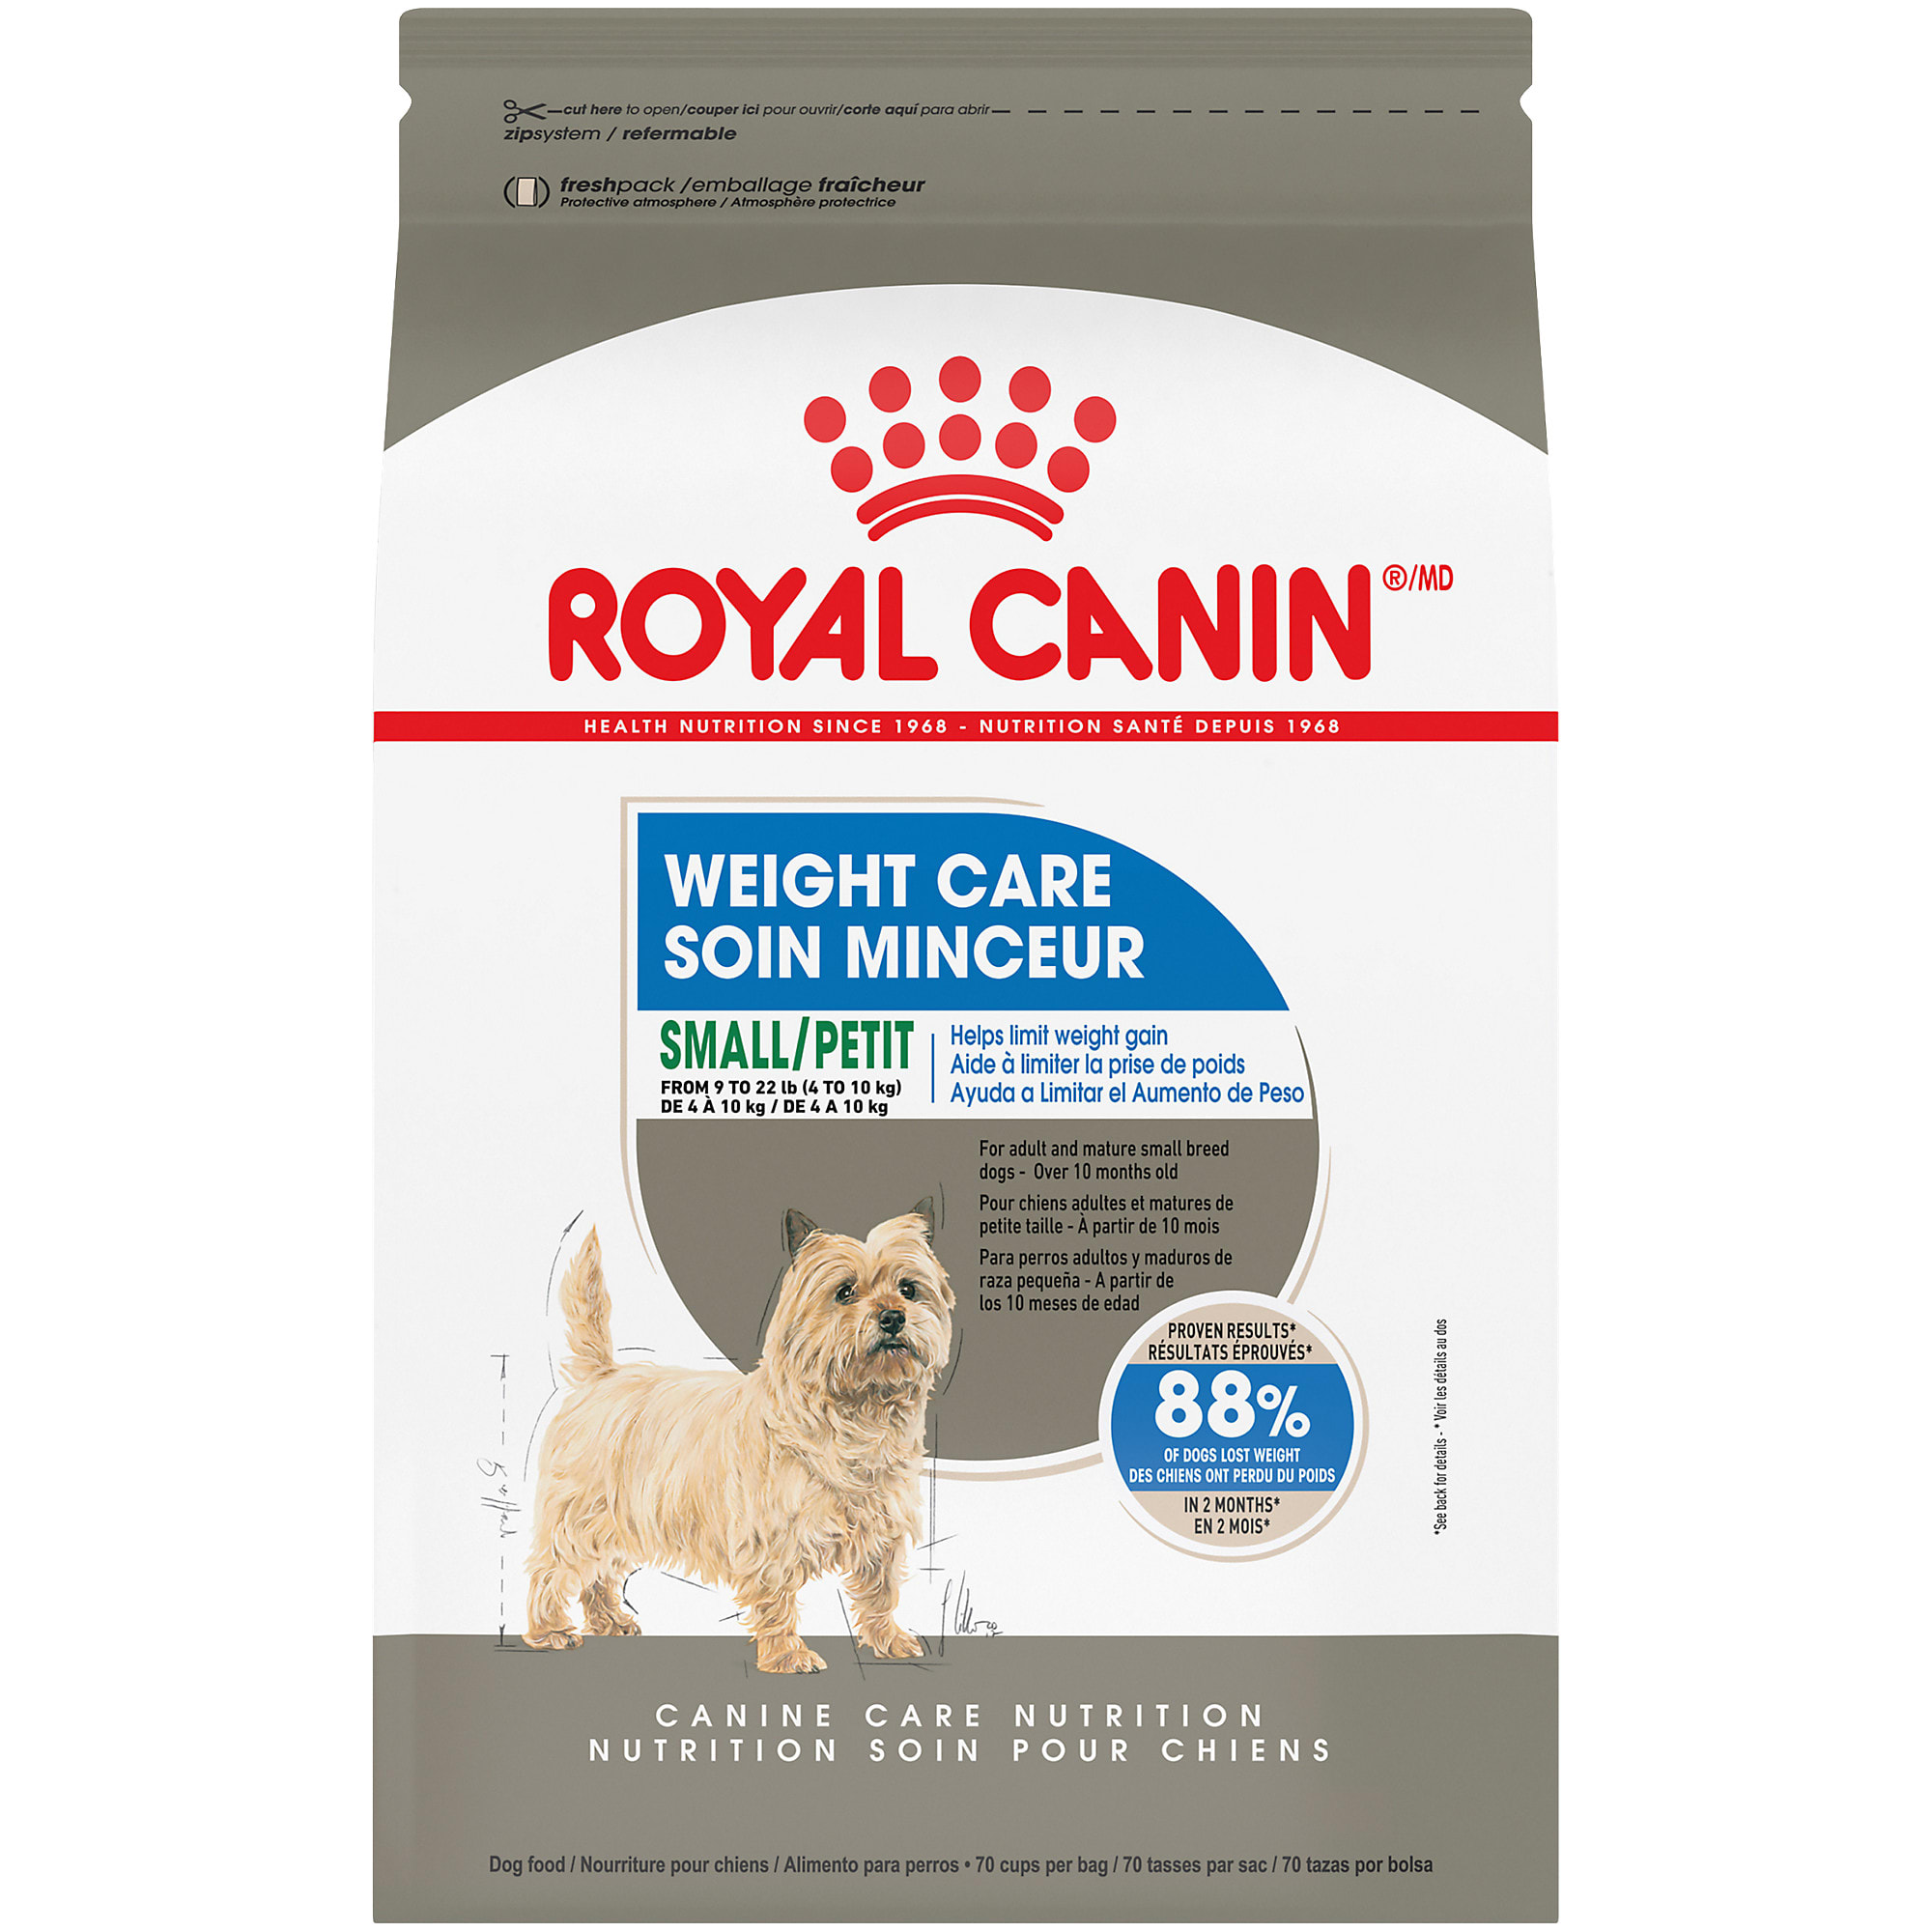 royal-canin-weight-care-adult-dry-dog-food-for-small-breeds-13-lbs